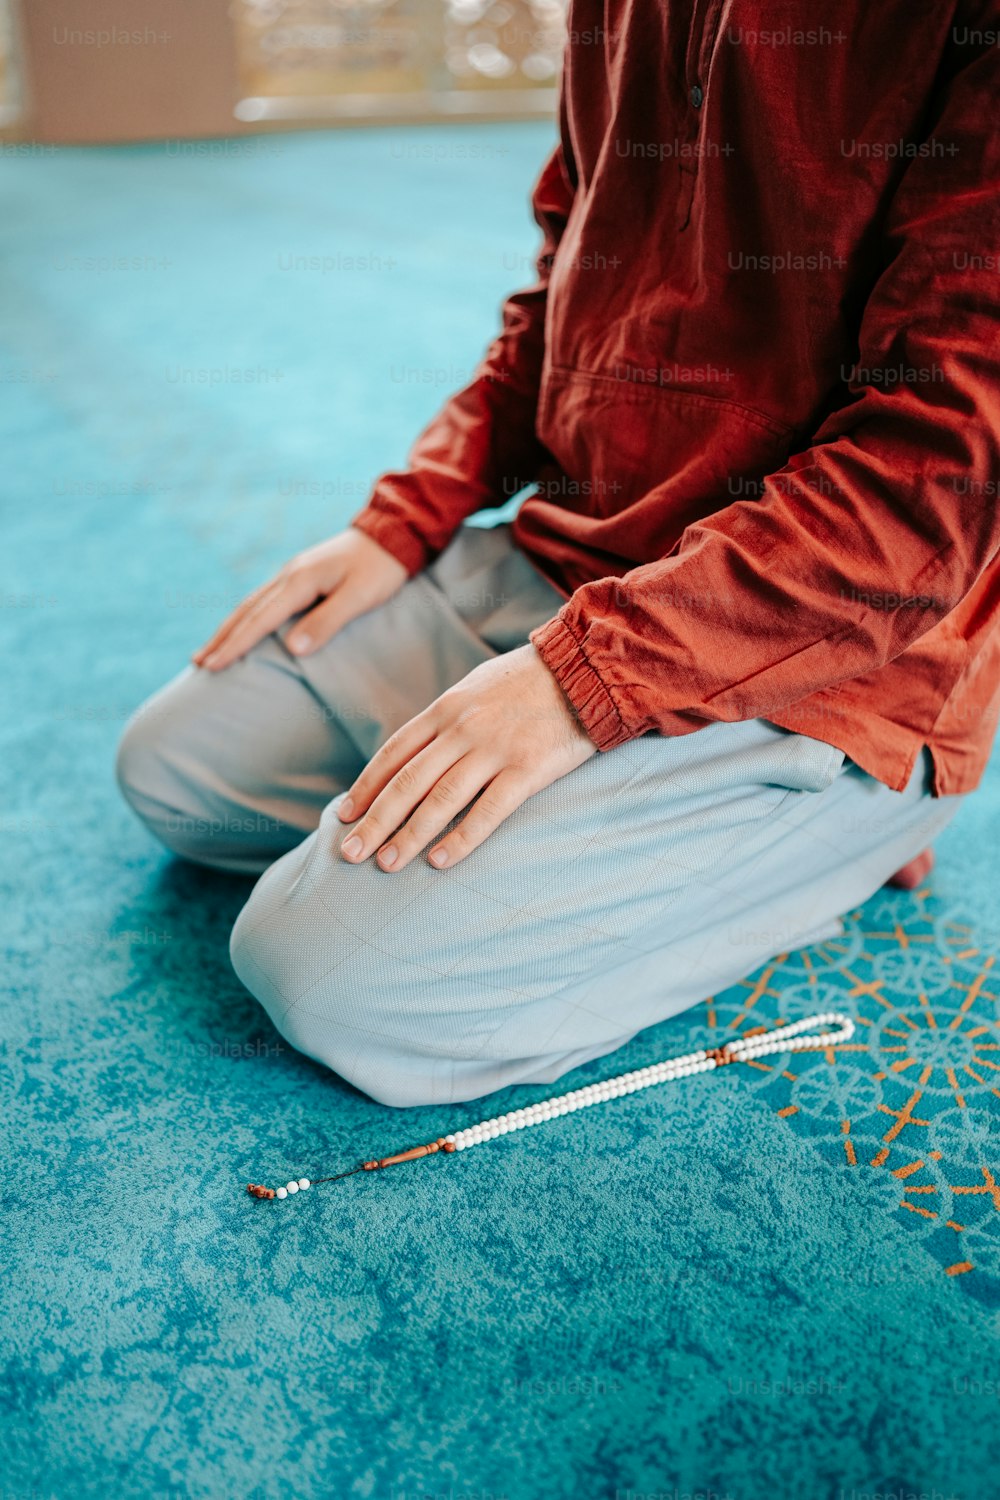 a person sitting on the floor with a pair of knitting needles